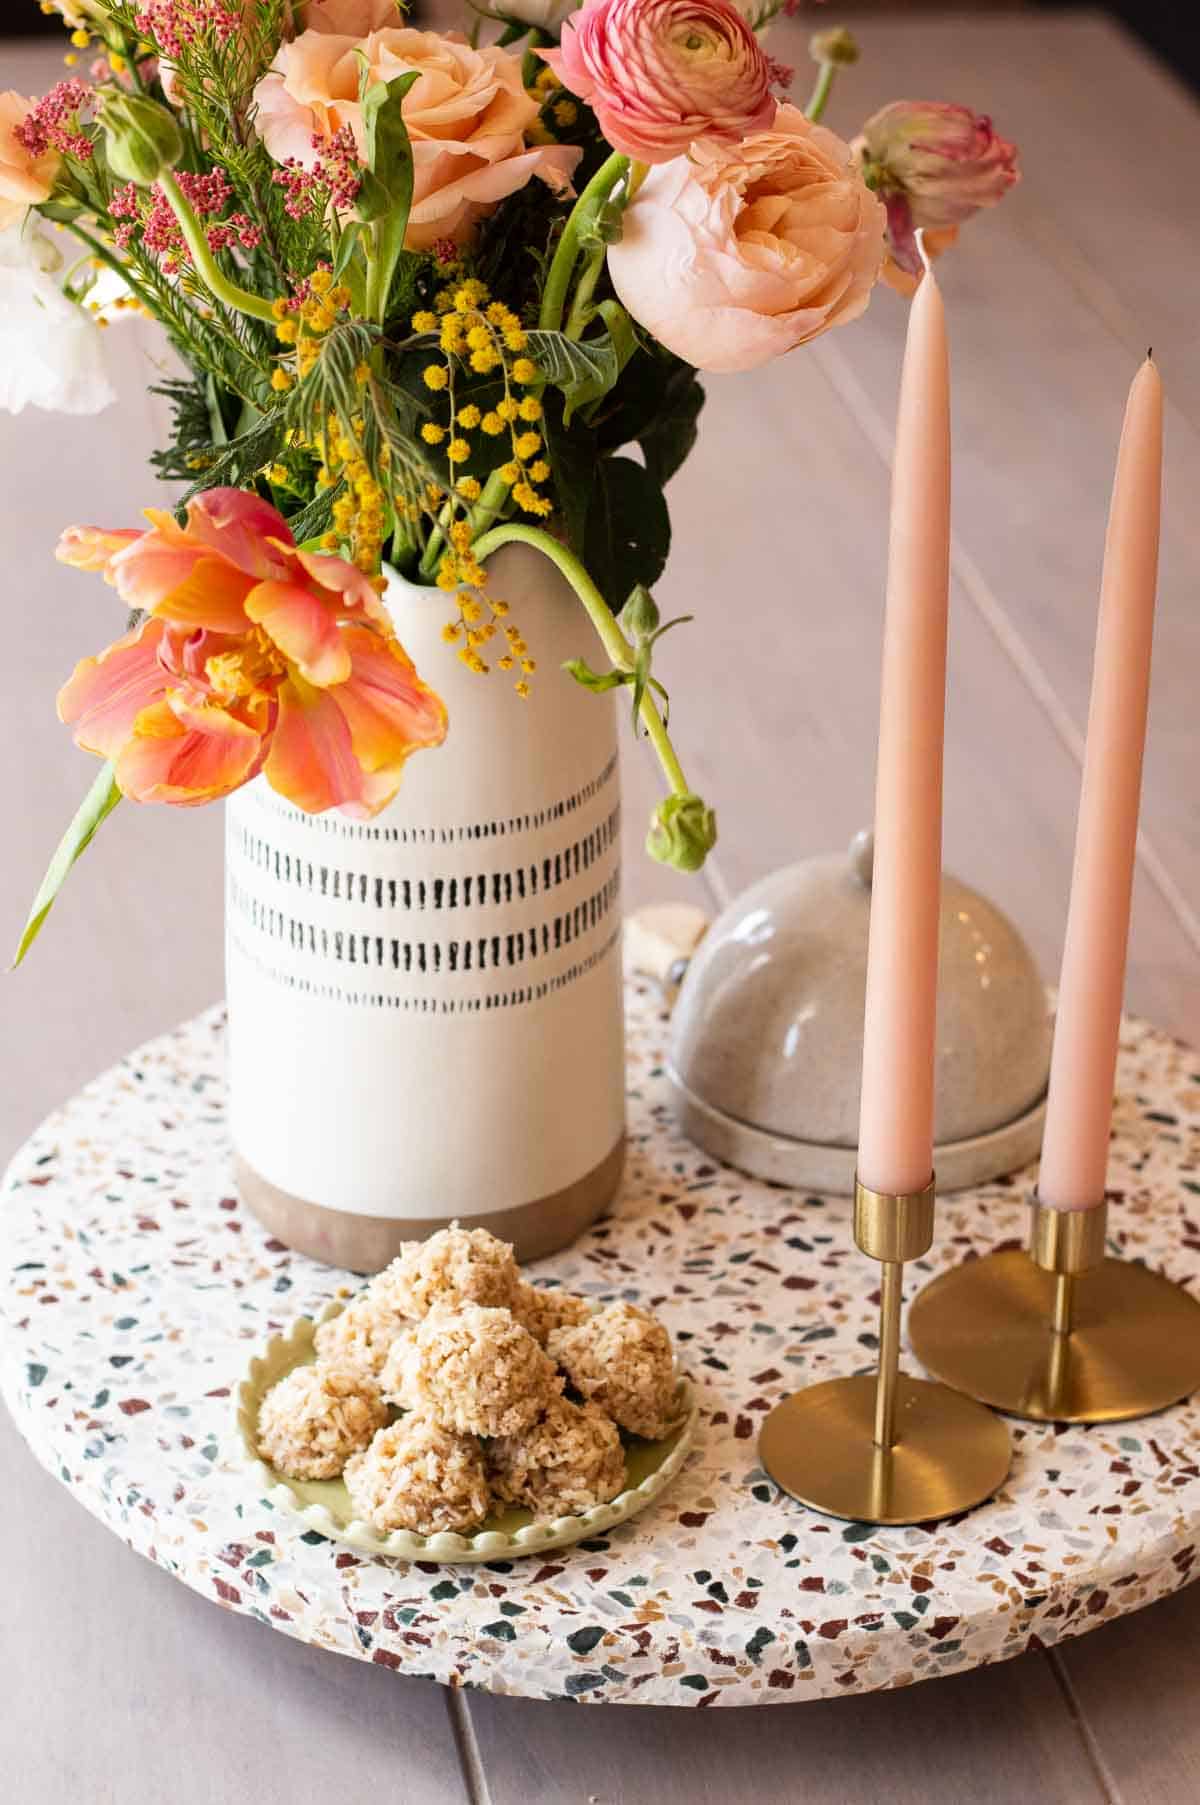 coconut macaroons on a green plate near candles and flowers